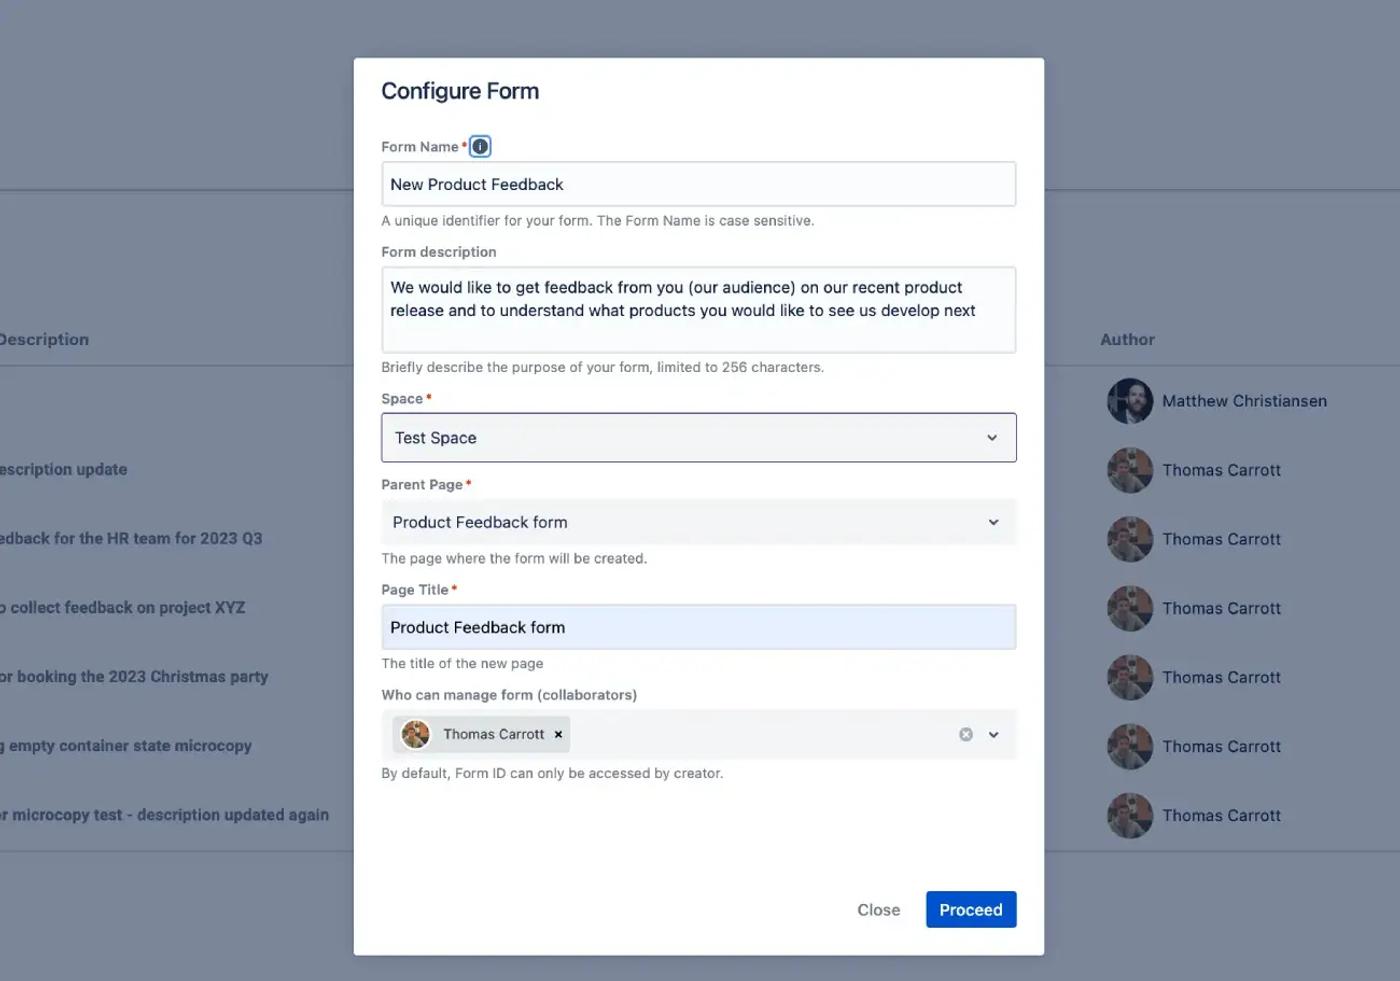 A Forms for Confluence dialog box with all fields completed